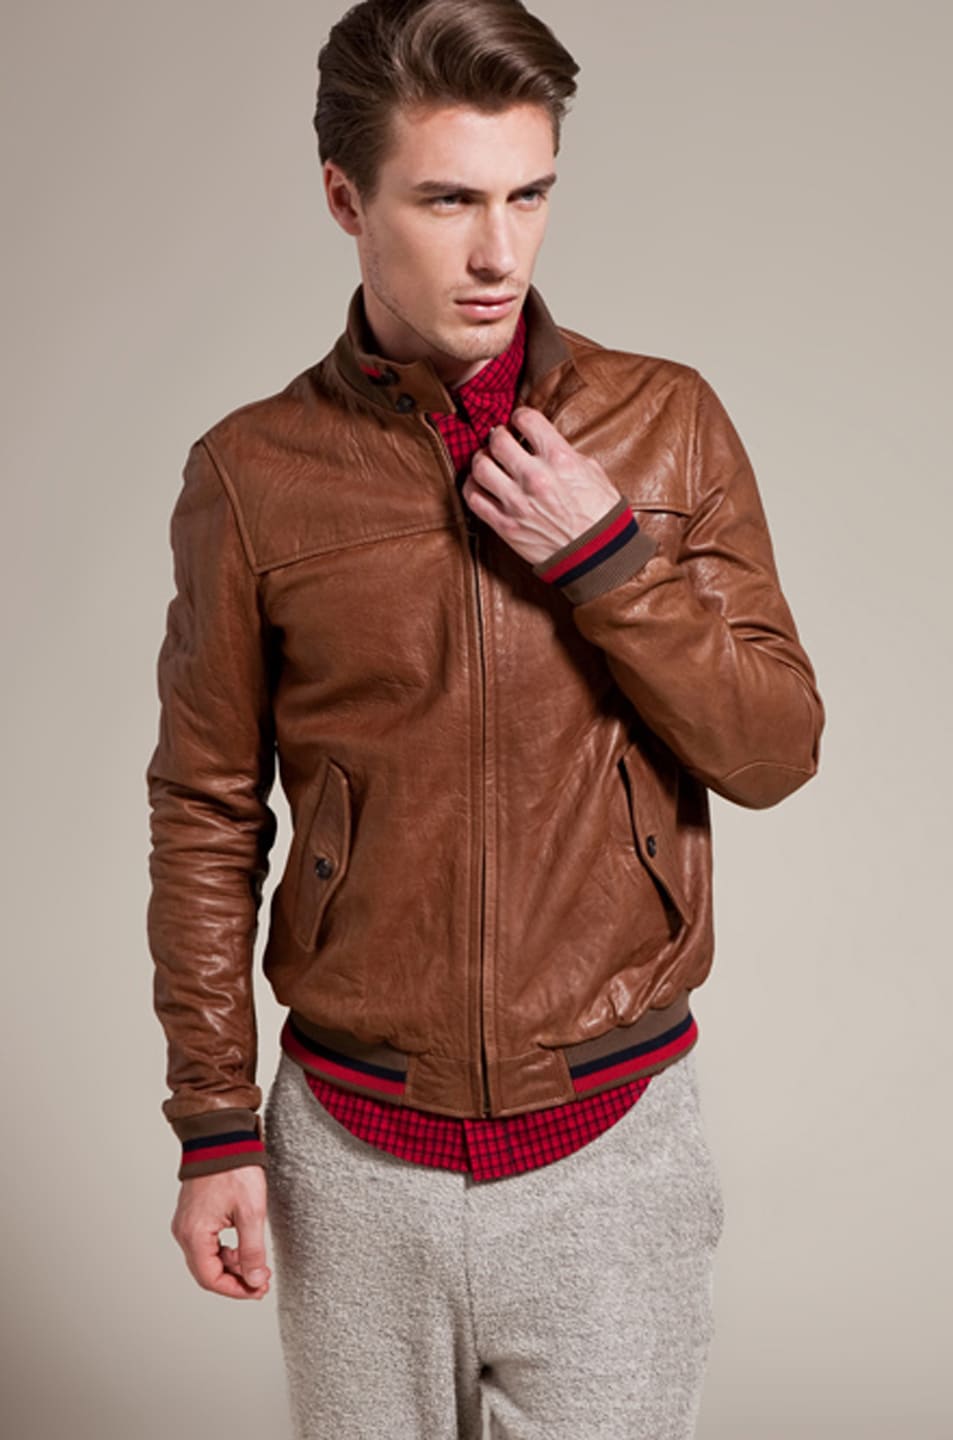 Band of Outsiders Leather Harrington Jacket in Antique Brown | FWRD